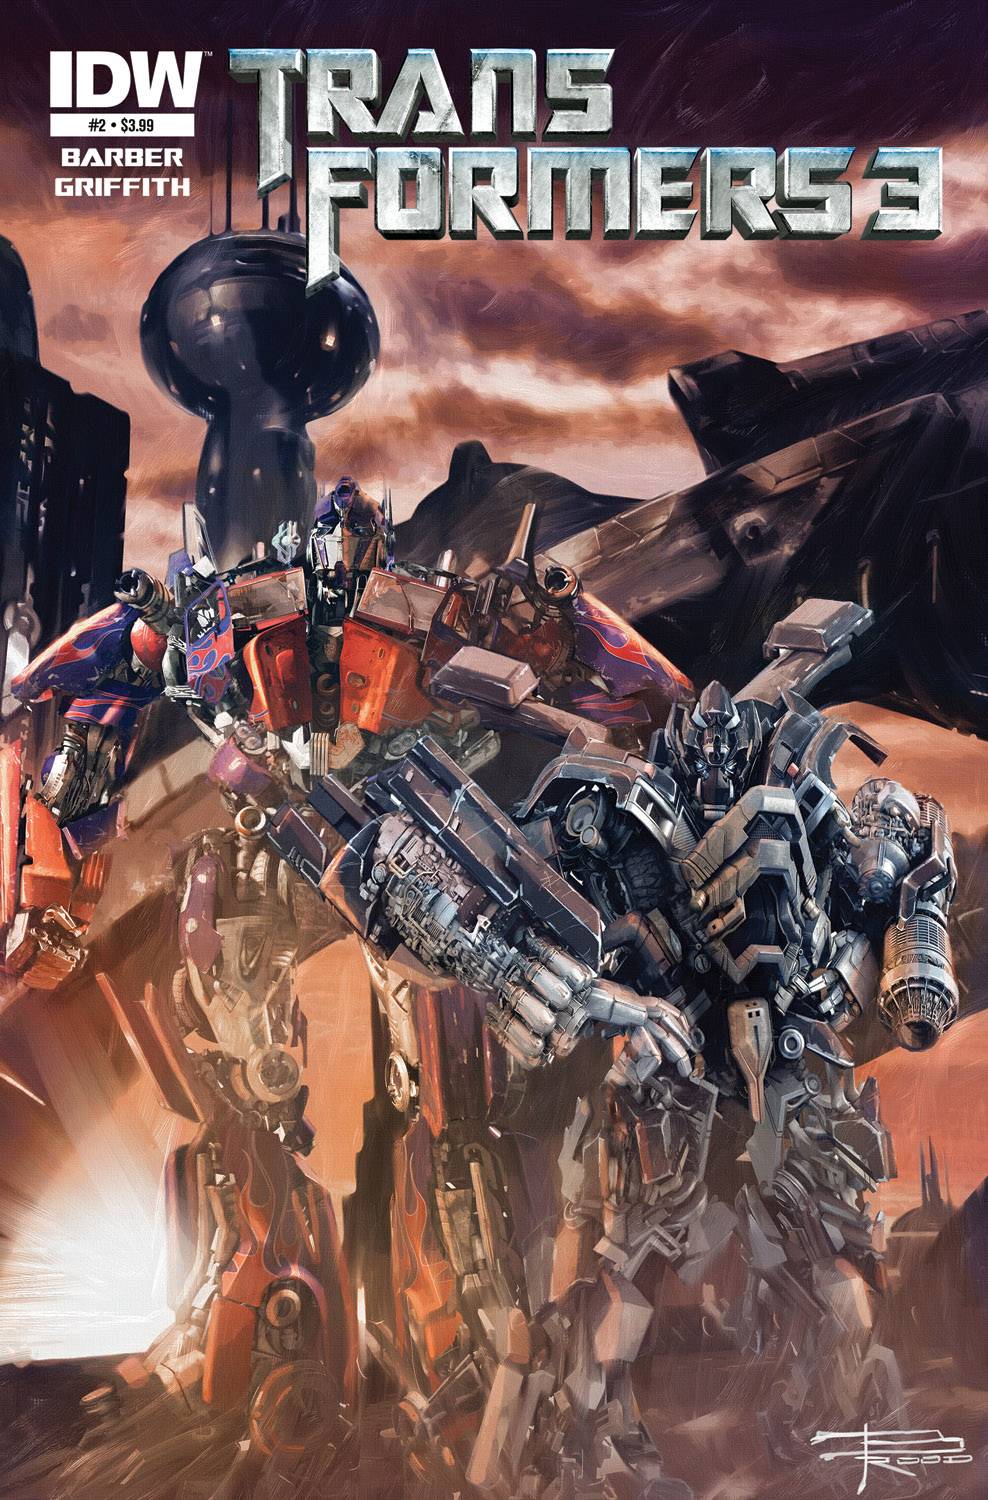 transformers 3 movie poster